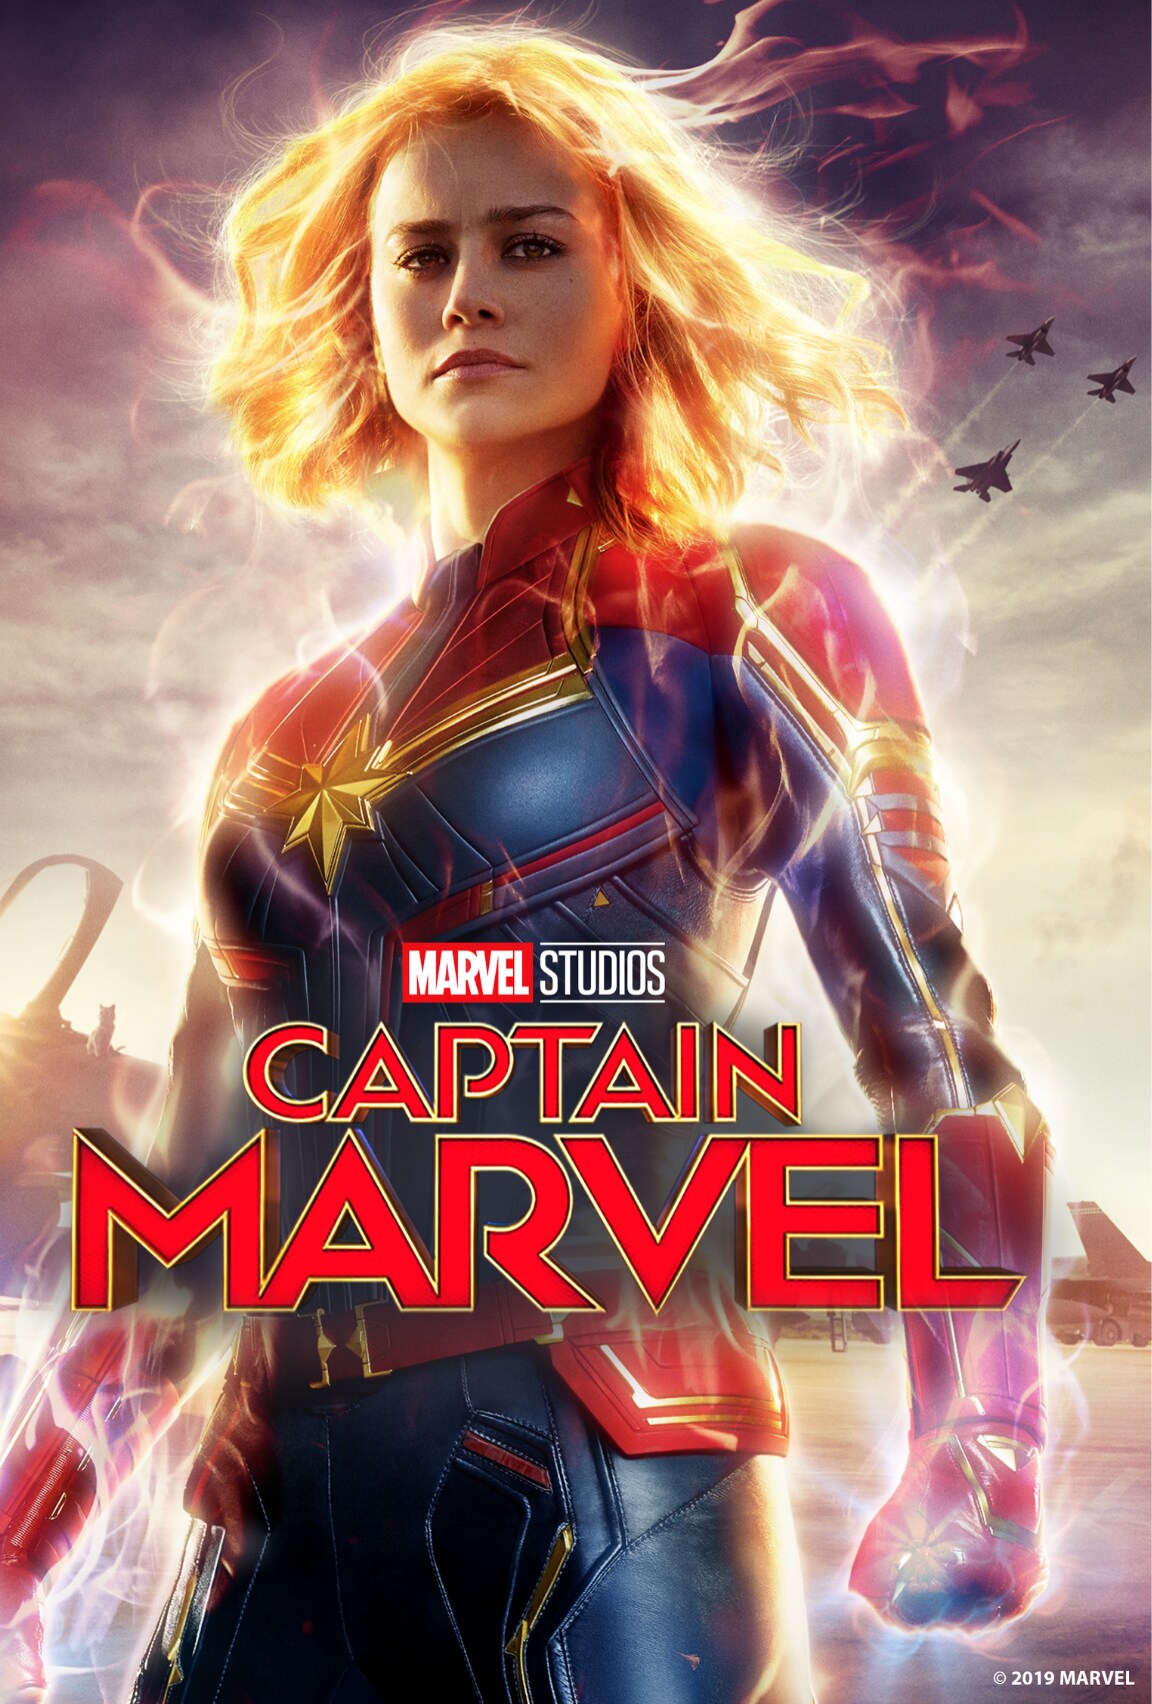 Brie Larson stands as Captain Marvel looking towards the camera, her hair flows and power appears to be flowing through her hands. The 'Marvel Studios' Captain Marvel' title is in the bottom third of the image.